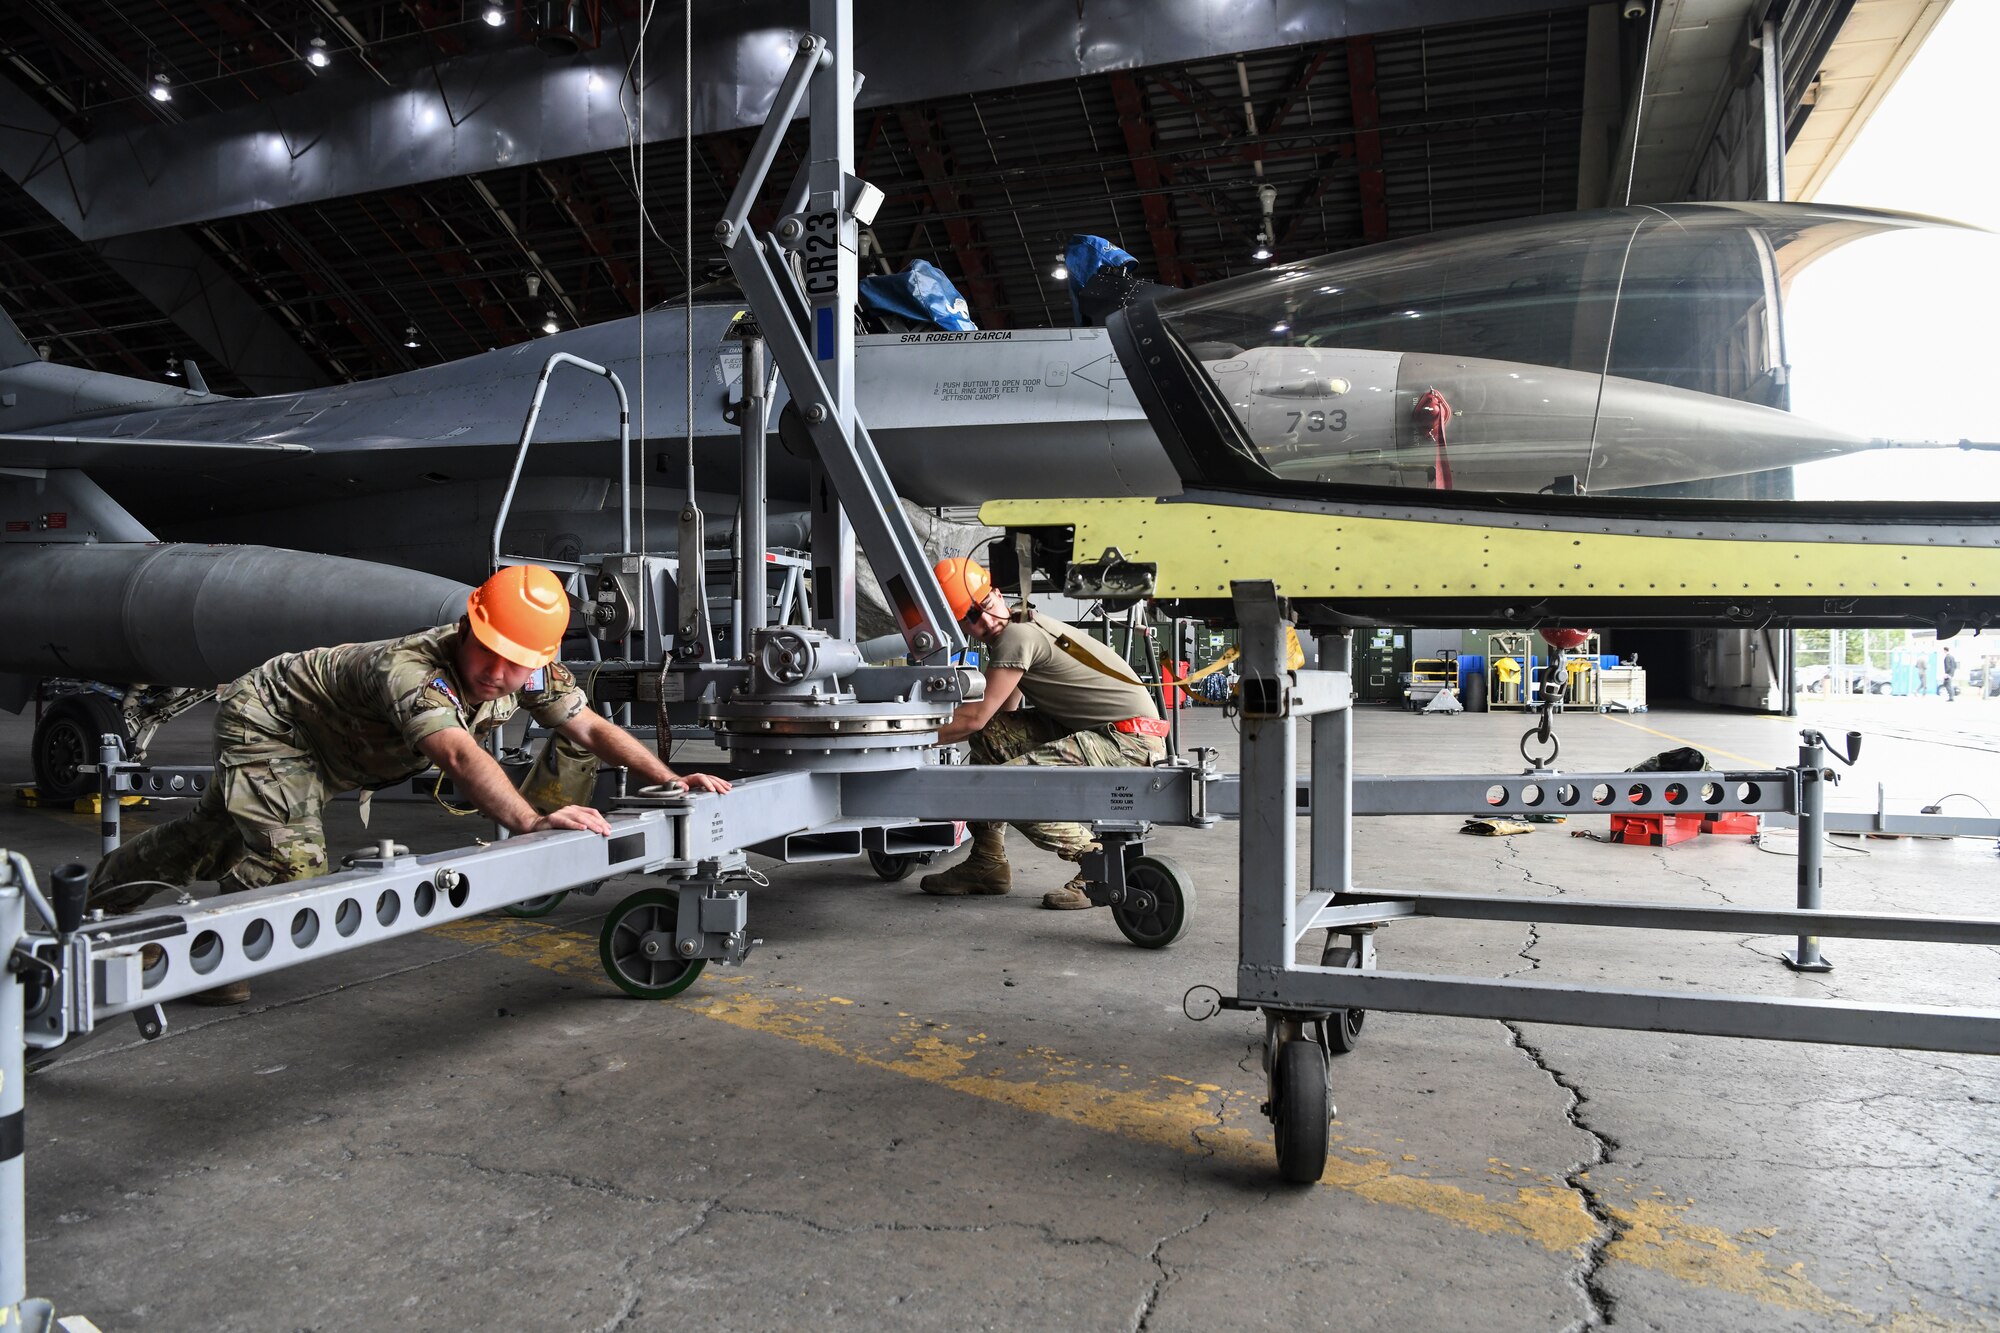 Military members working with a crane on a jet.